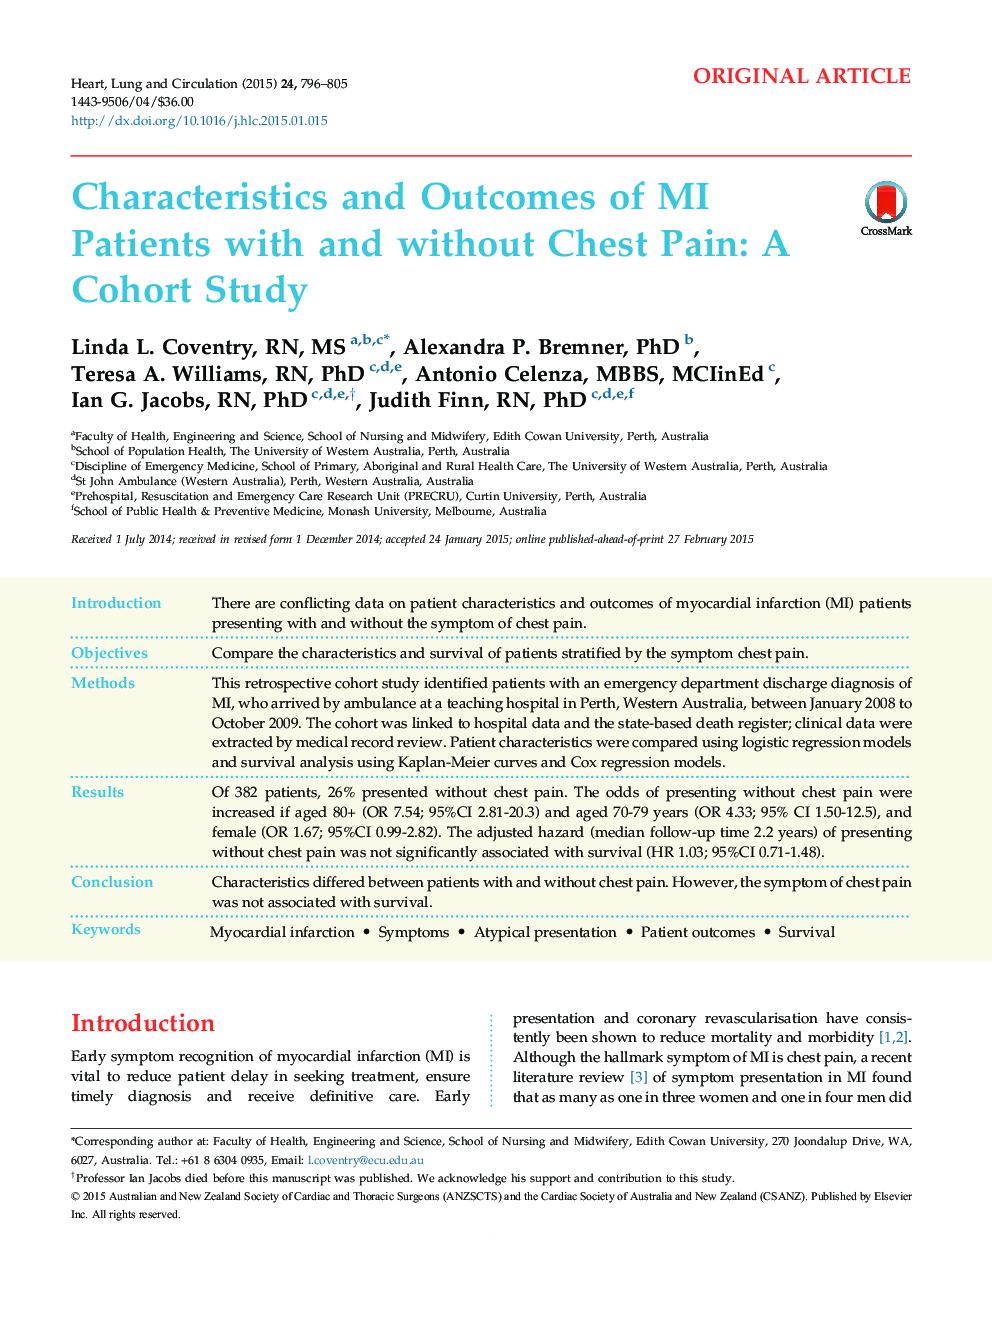 Characteristics and Outcomes of MI Patients with and without Chest Pain: A Cohort Study